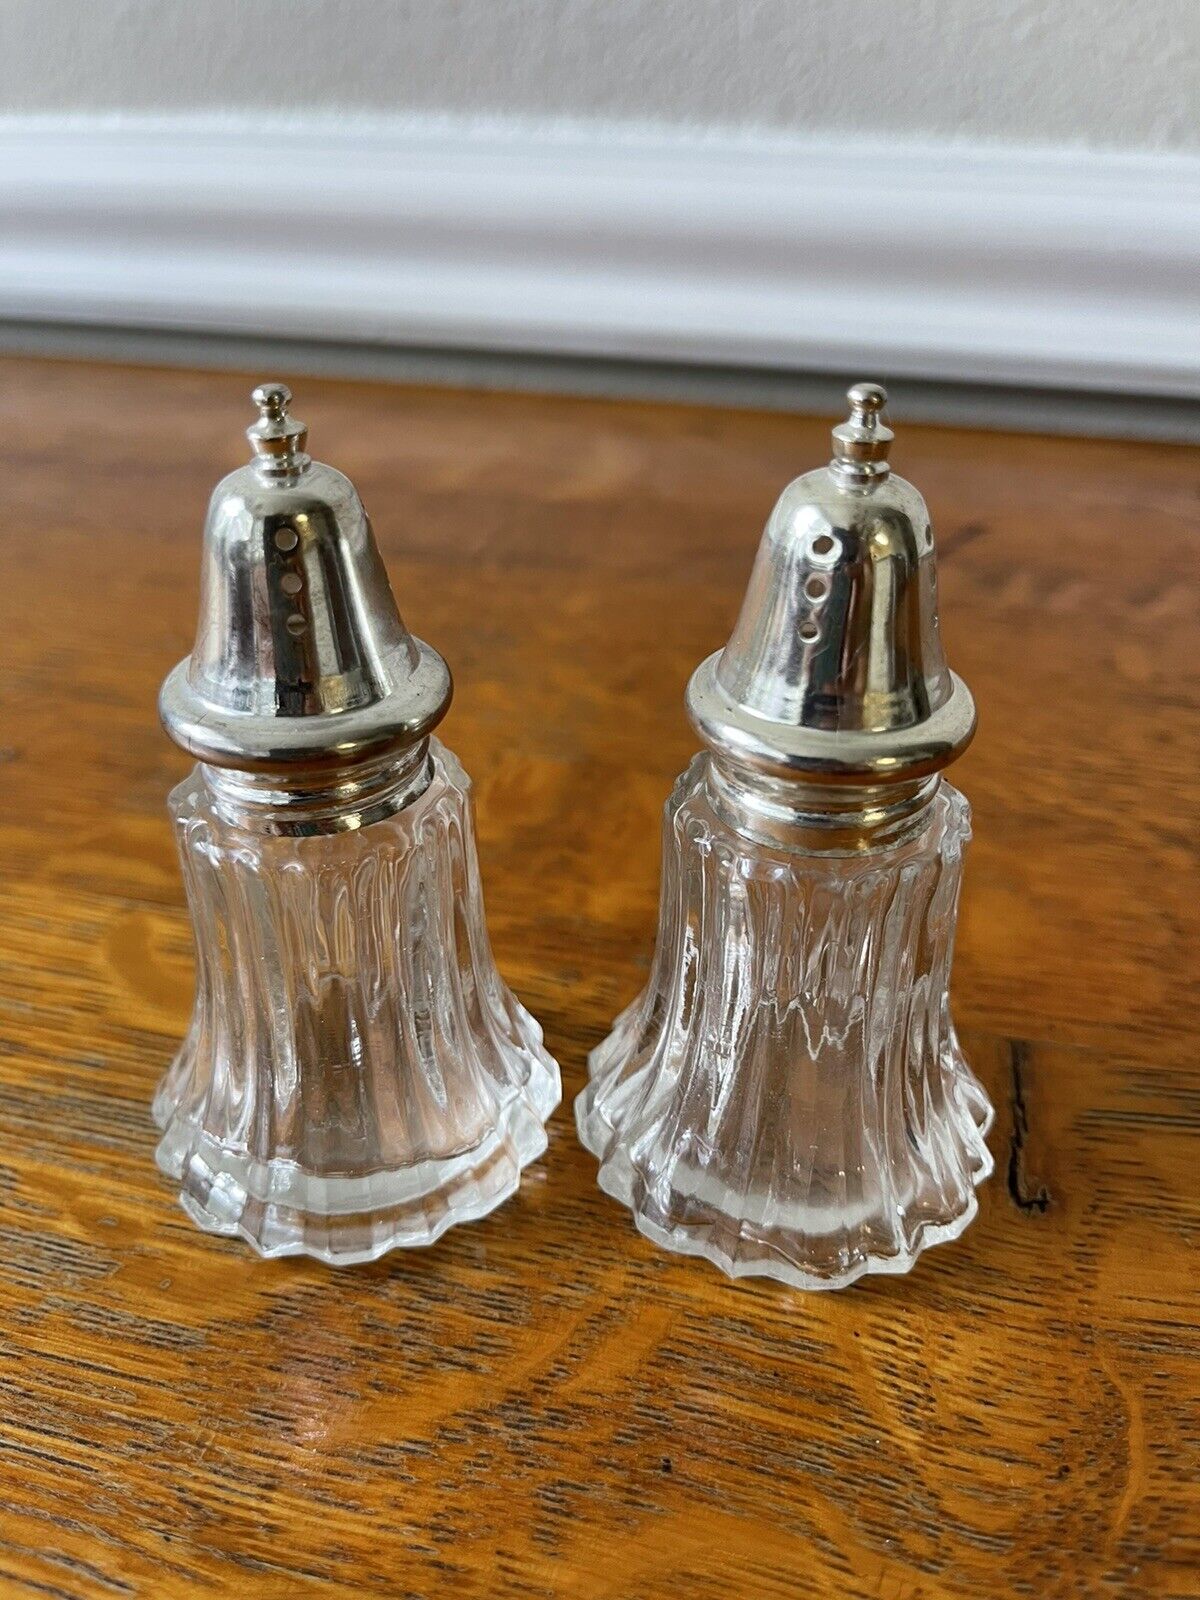 Pair of antique Glass Victorian style salt & pepper shakers Silver 